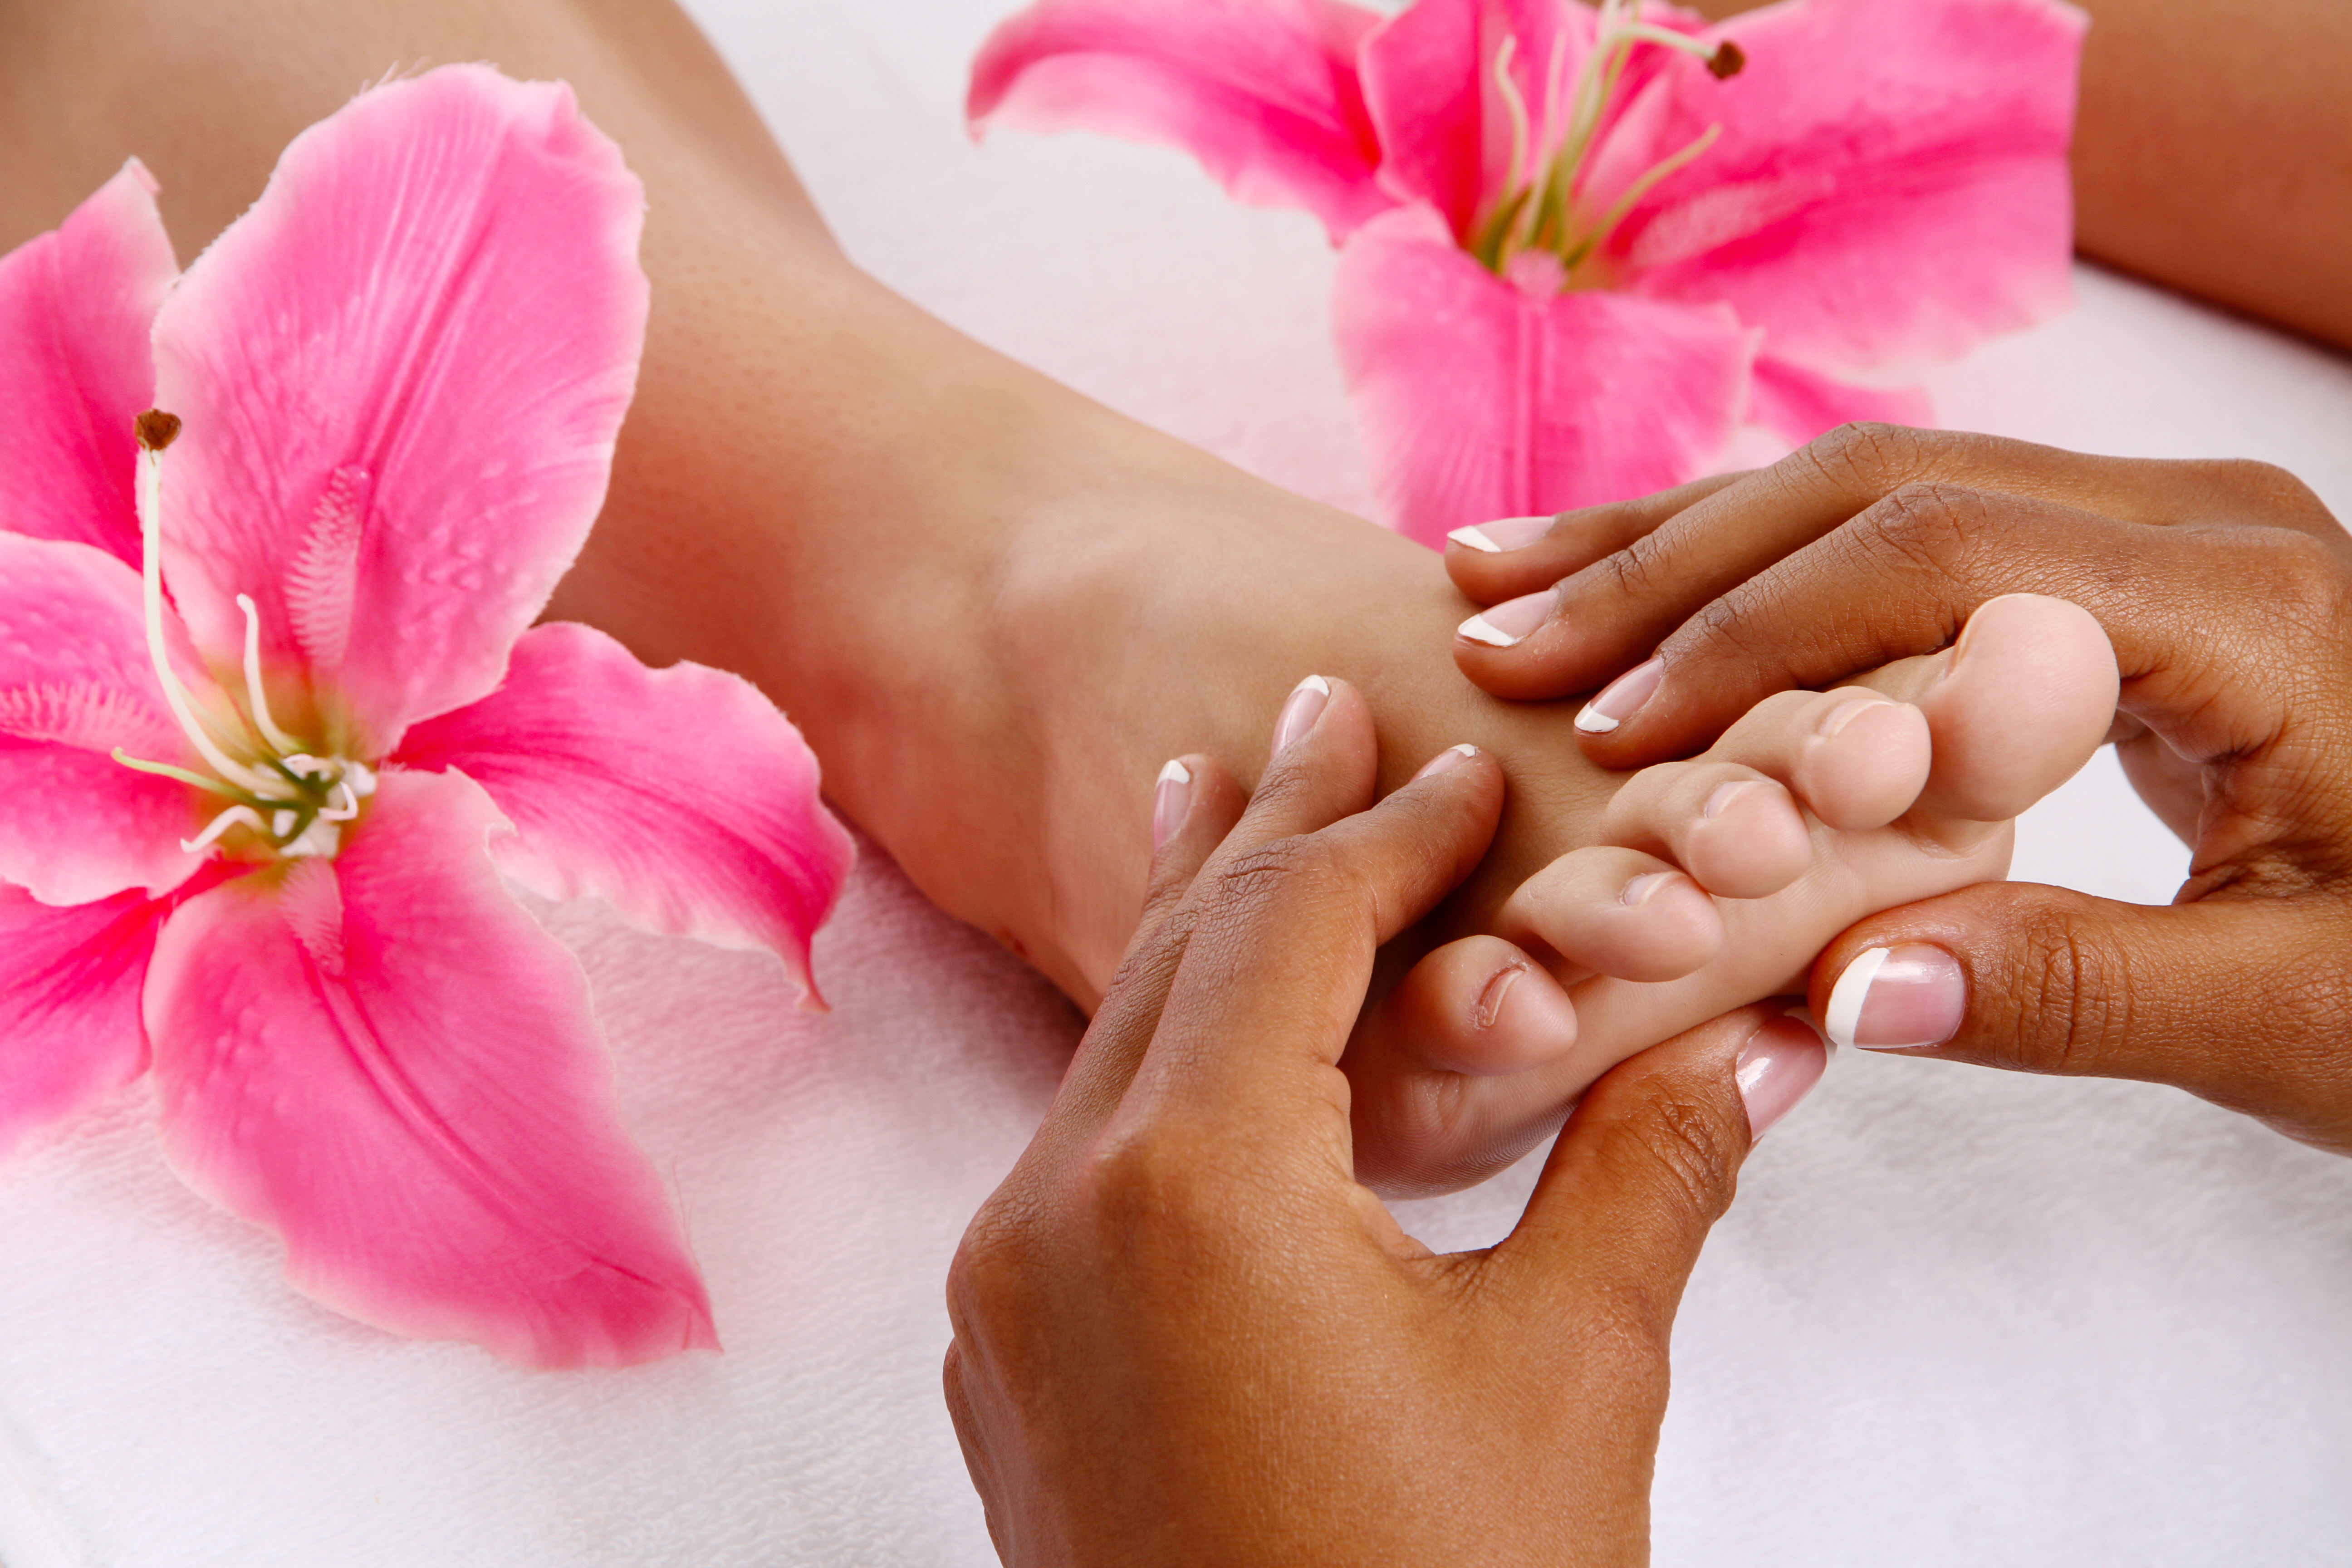 Reflexology Foot Massage The Hows And Why